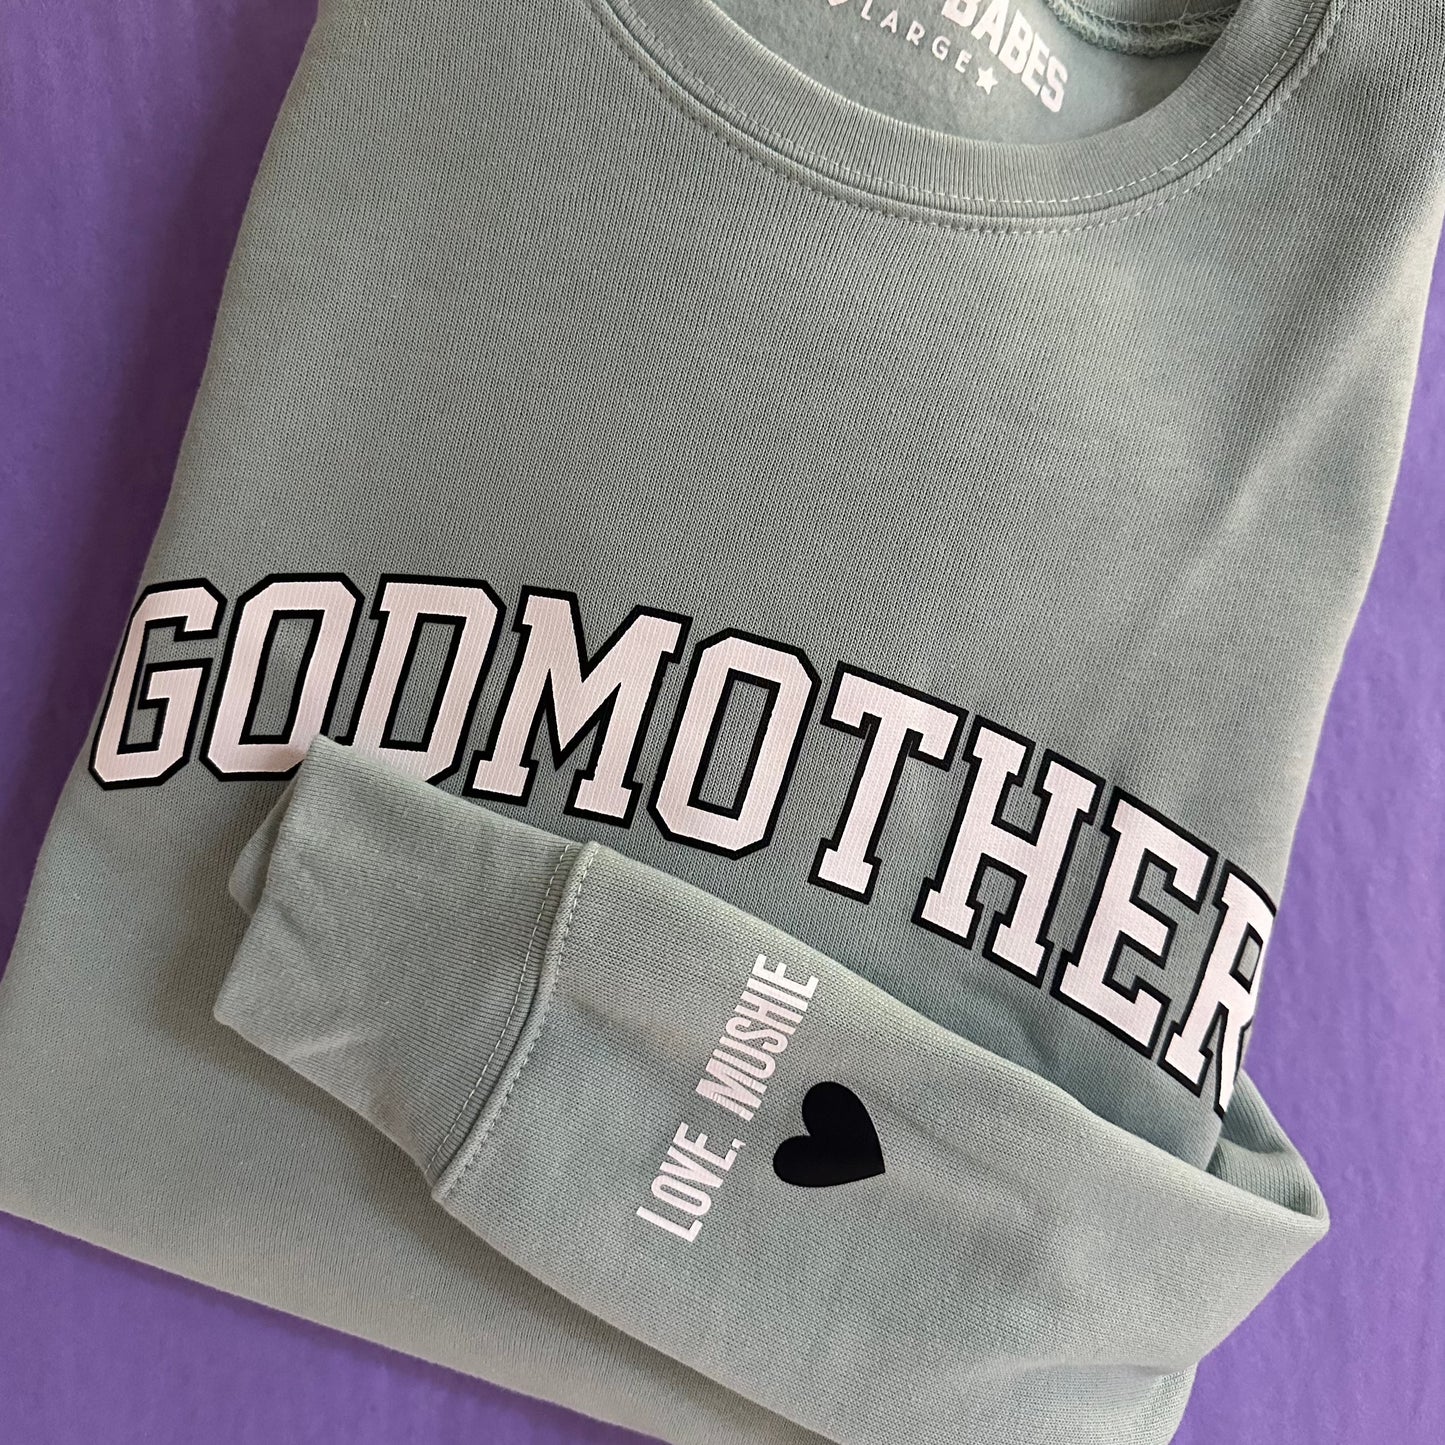 LOVE ON THE CUFF ♡ seafoam godmother sweatshirt with personalized cuff